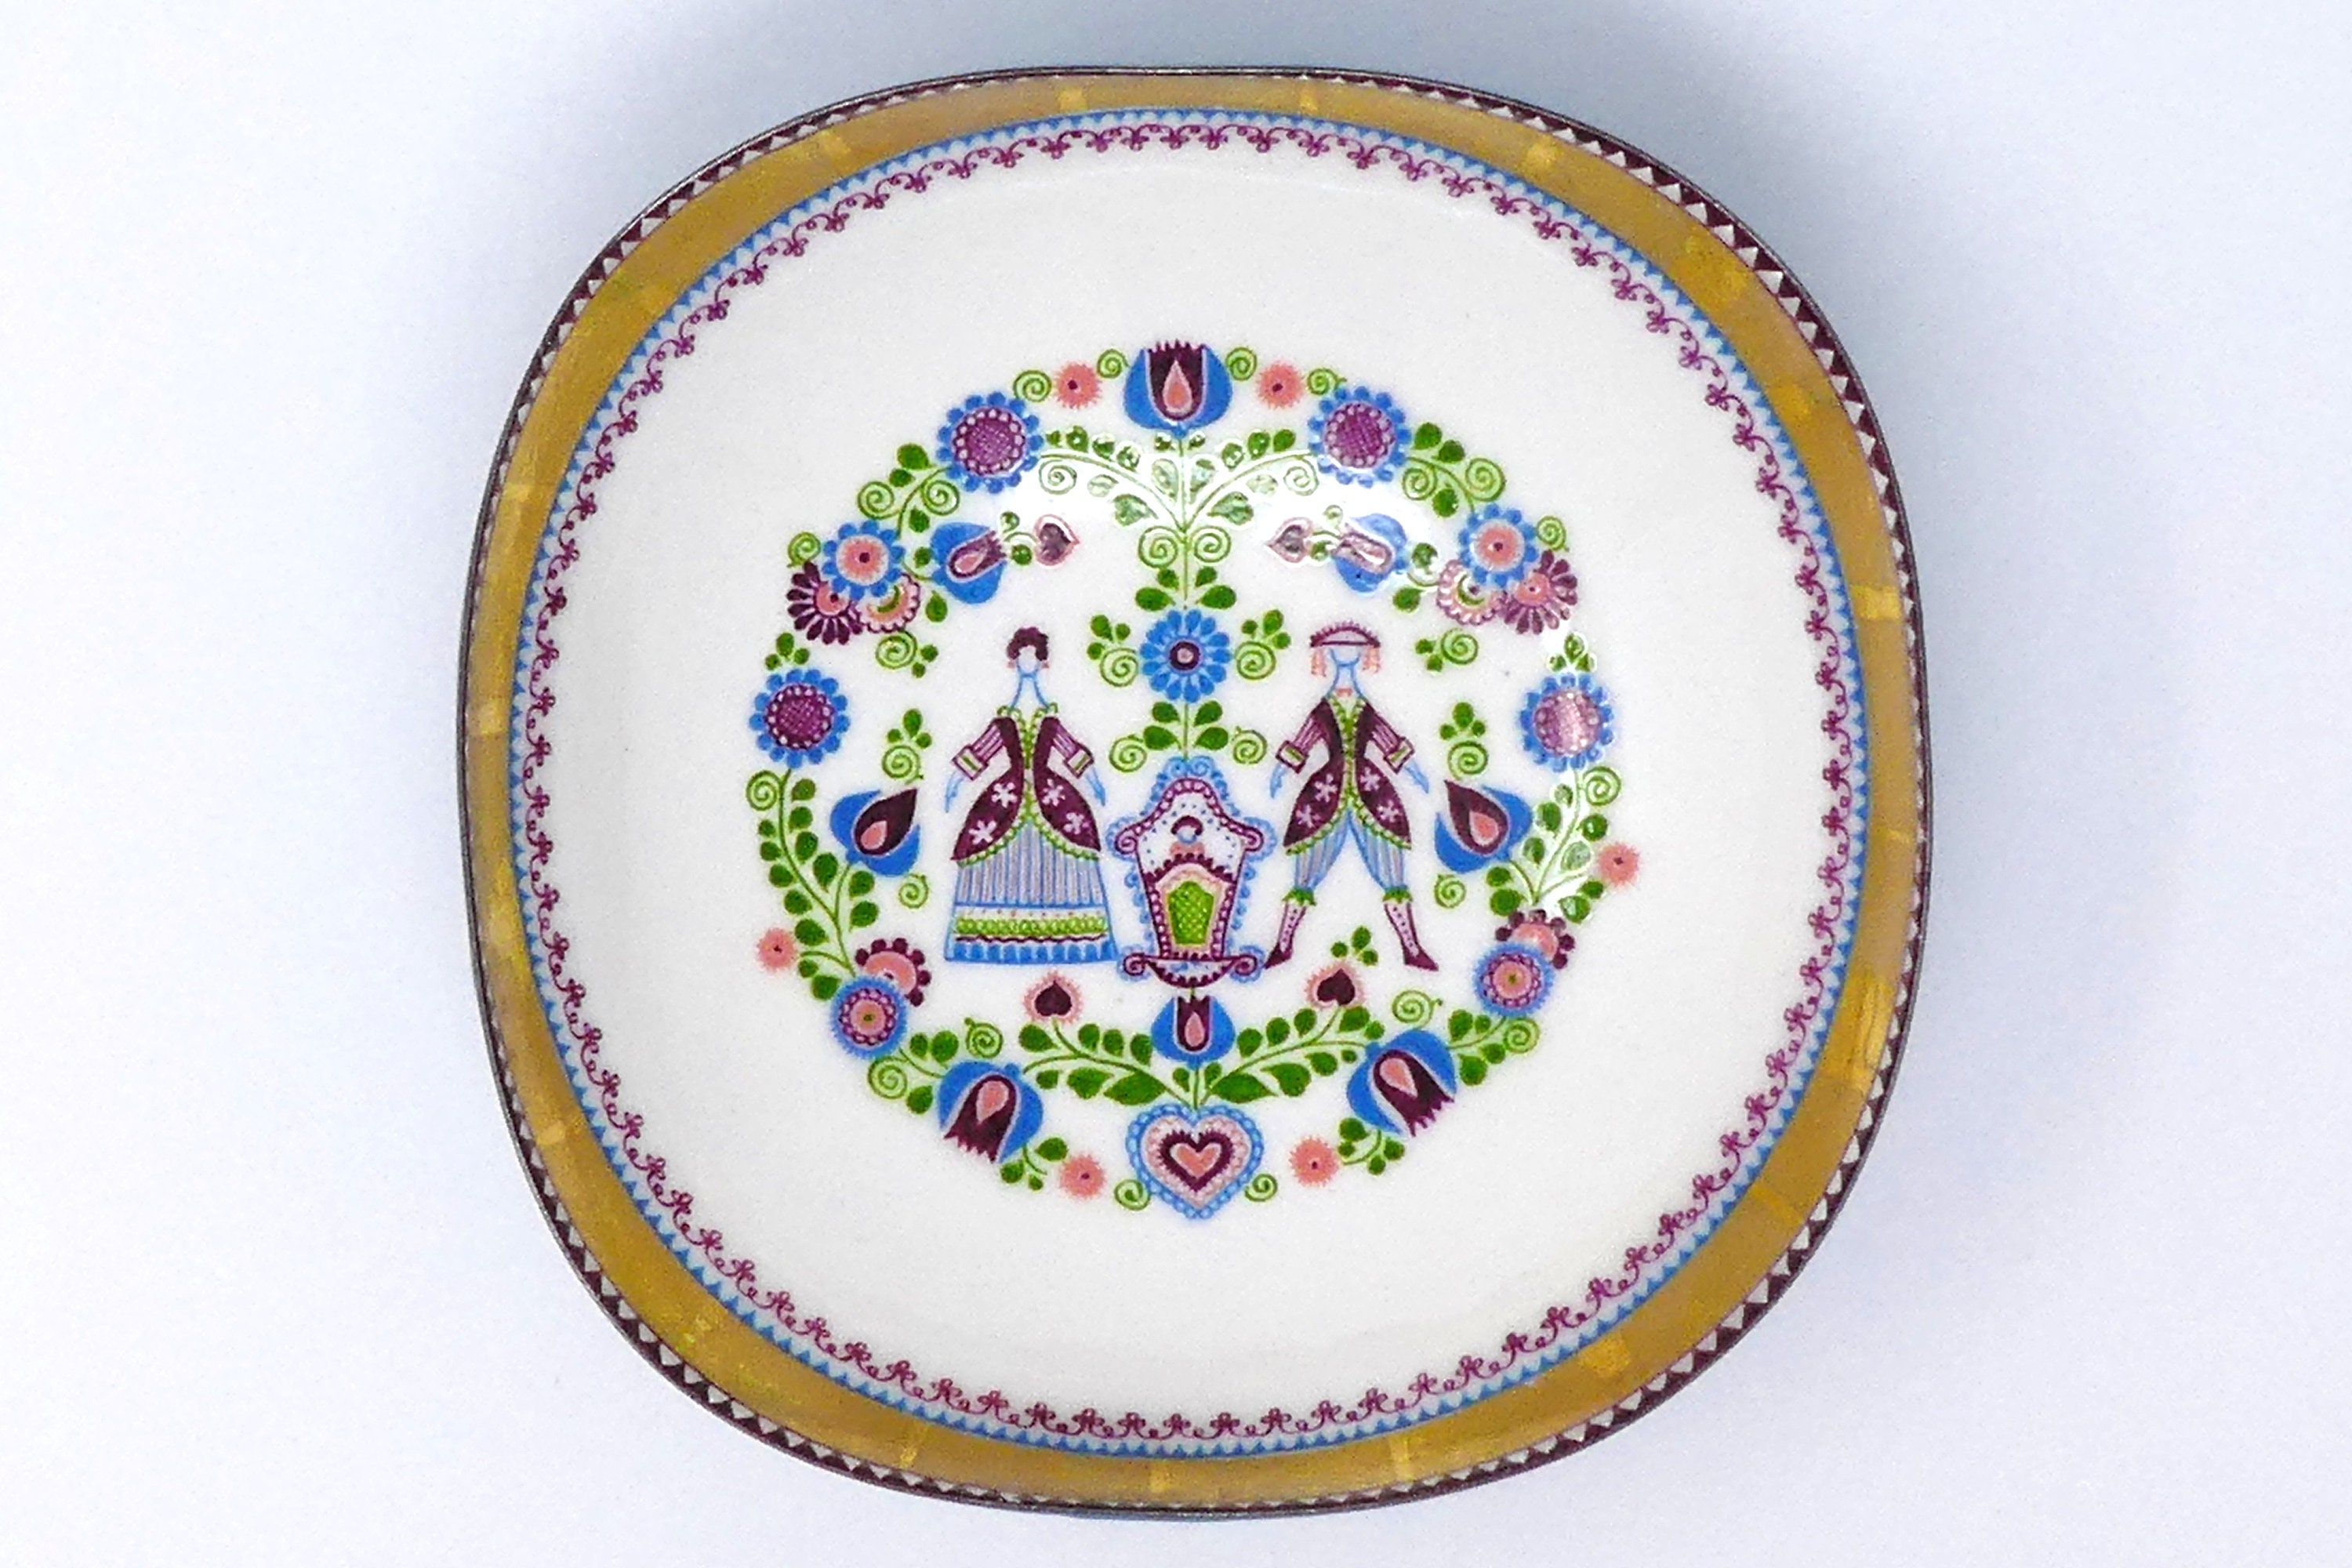 Steinbock Enamel Plates, Two Pieces, Handmade and Painted In